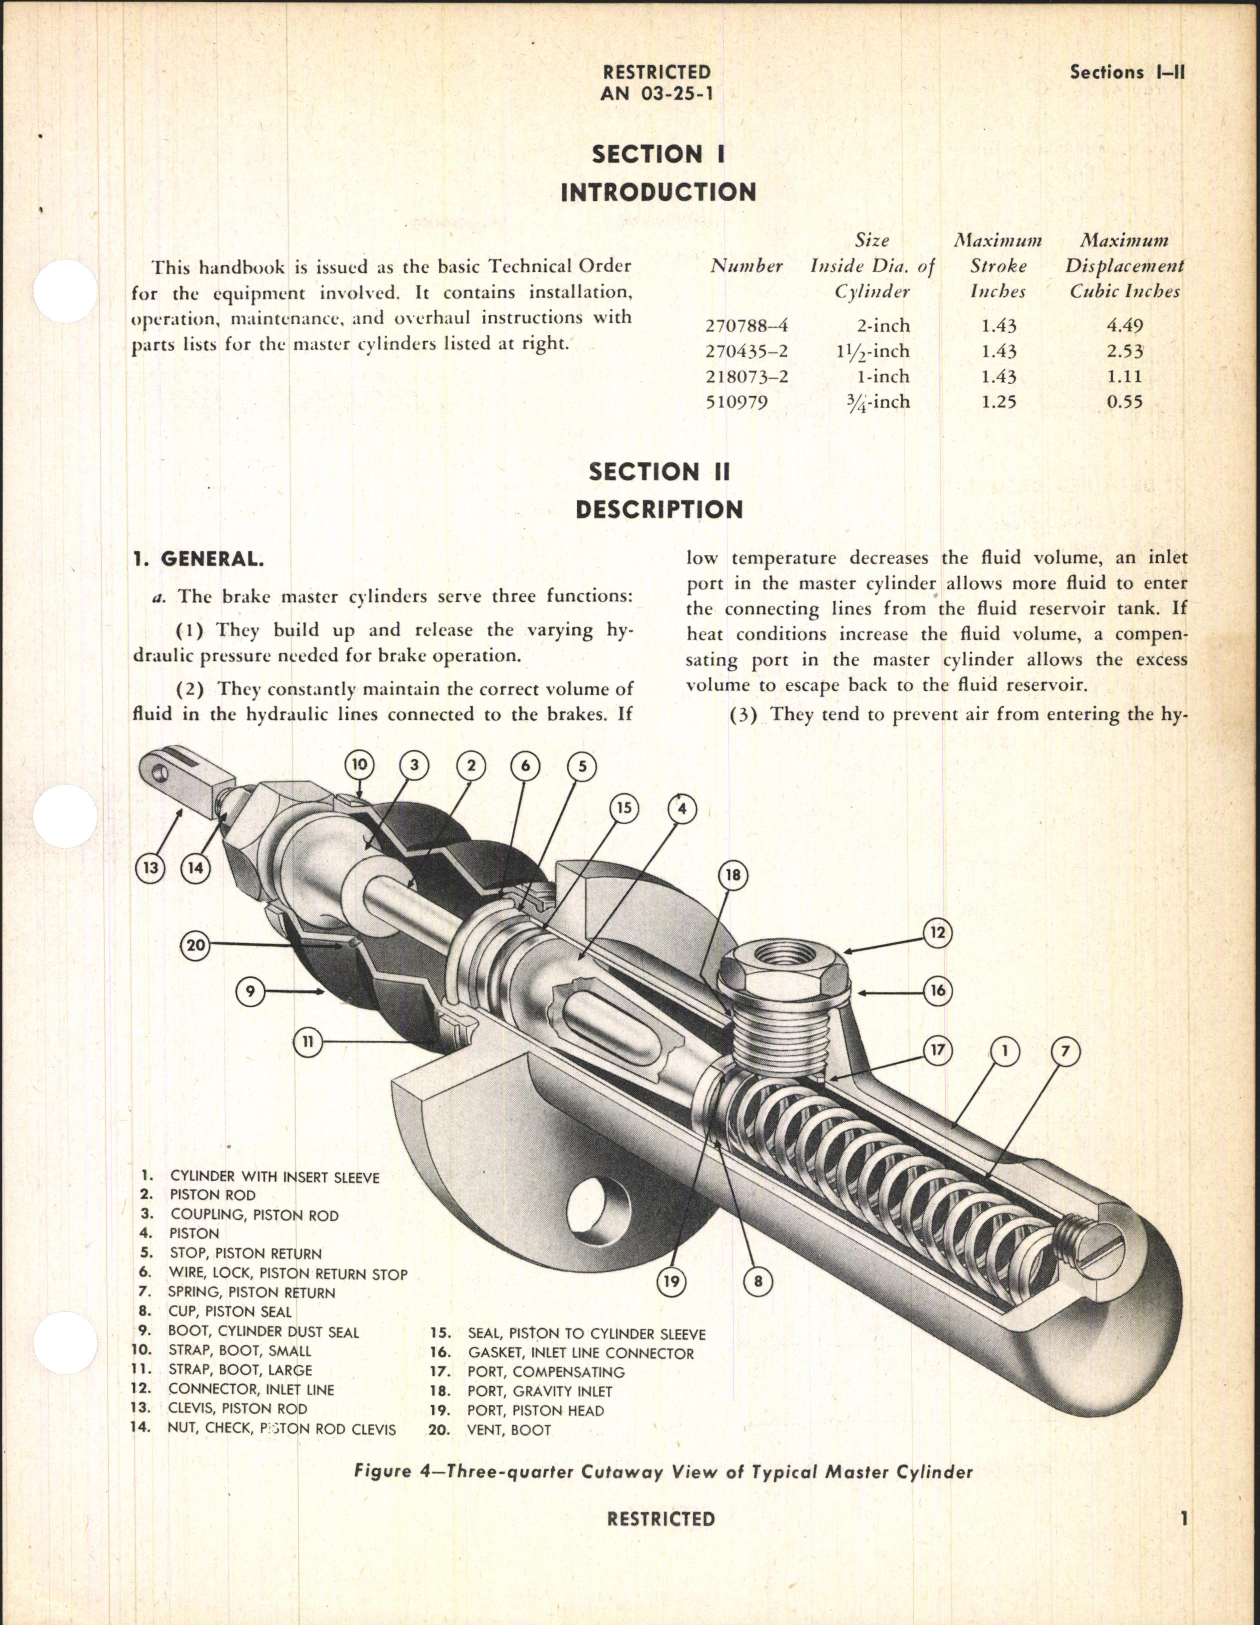 Sample page 5 from AirCorps Library document: Handbook of Instructions with Parts Catalog for Master Brake Cylinders (Goodyear)